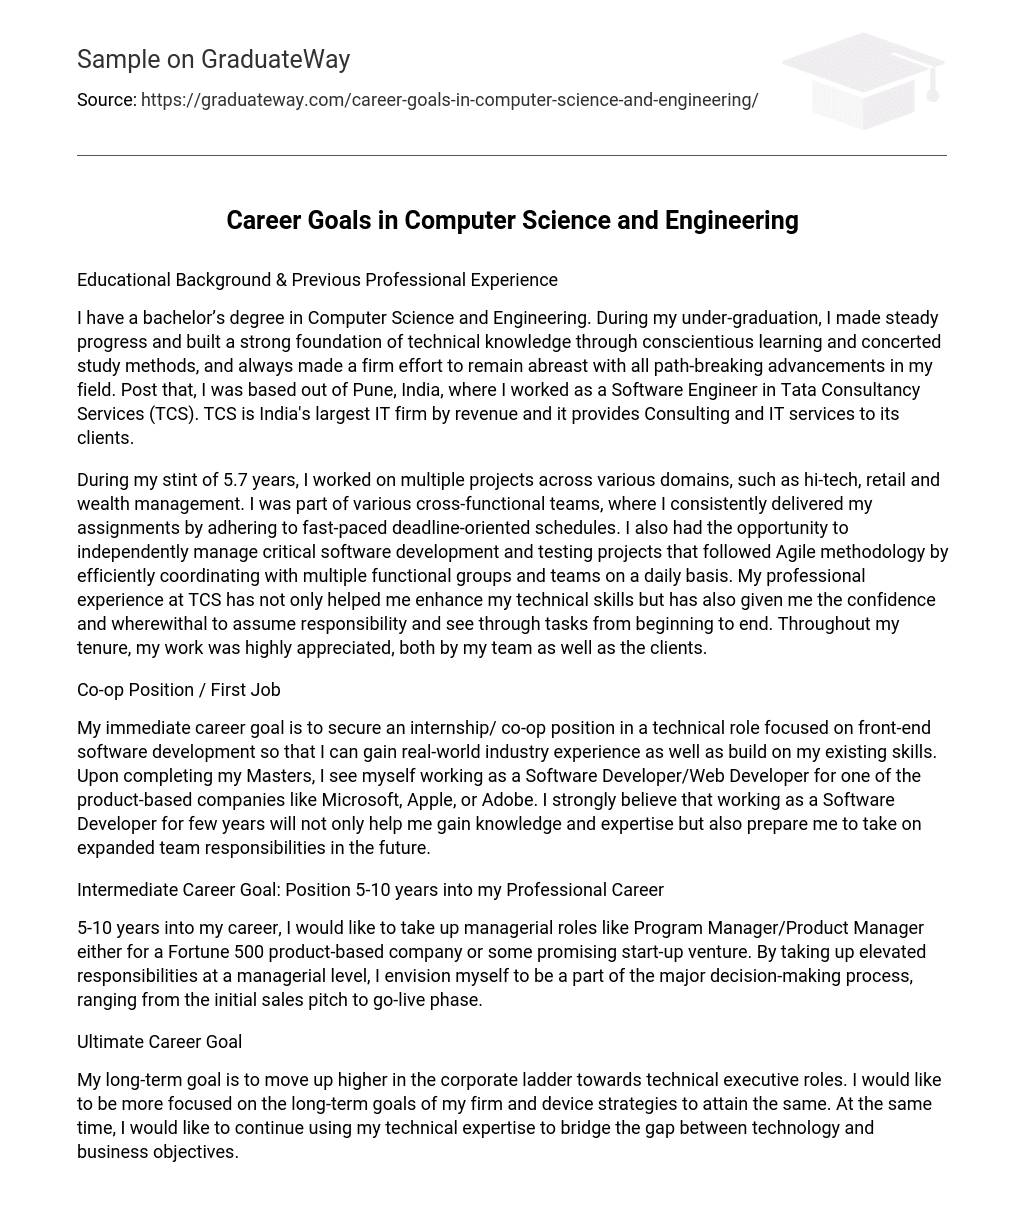 essay about career goals in computer science